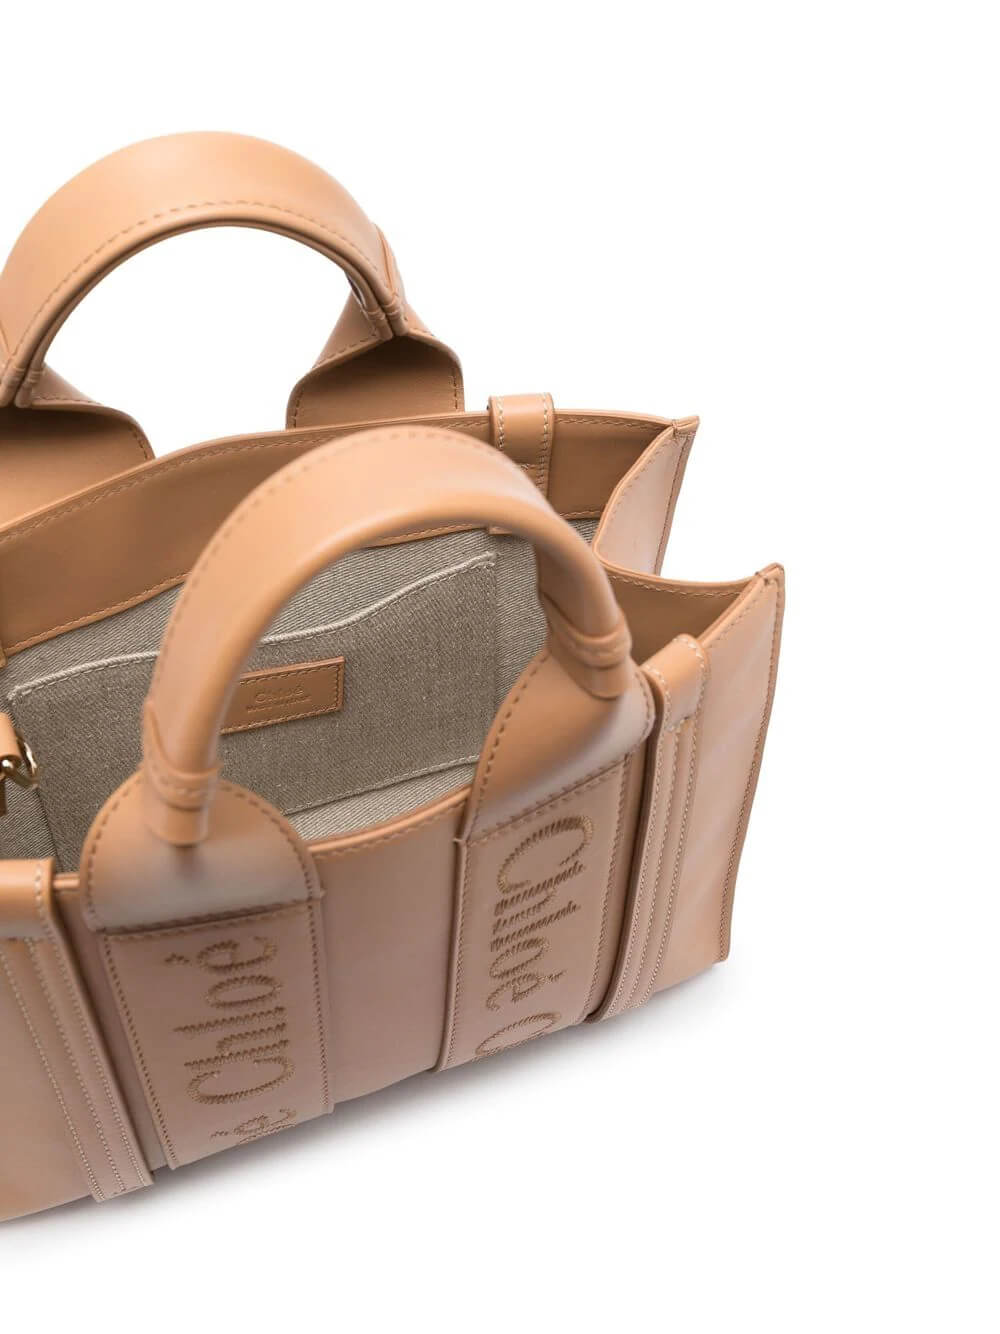 Chloe Woody Small Tote With Strap in Light Tan available at The New Trend